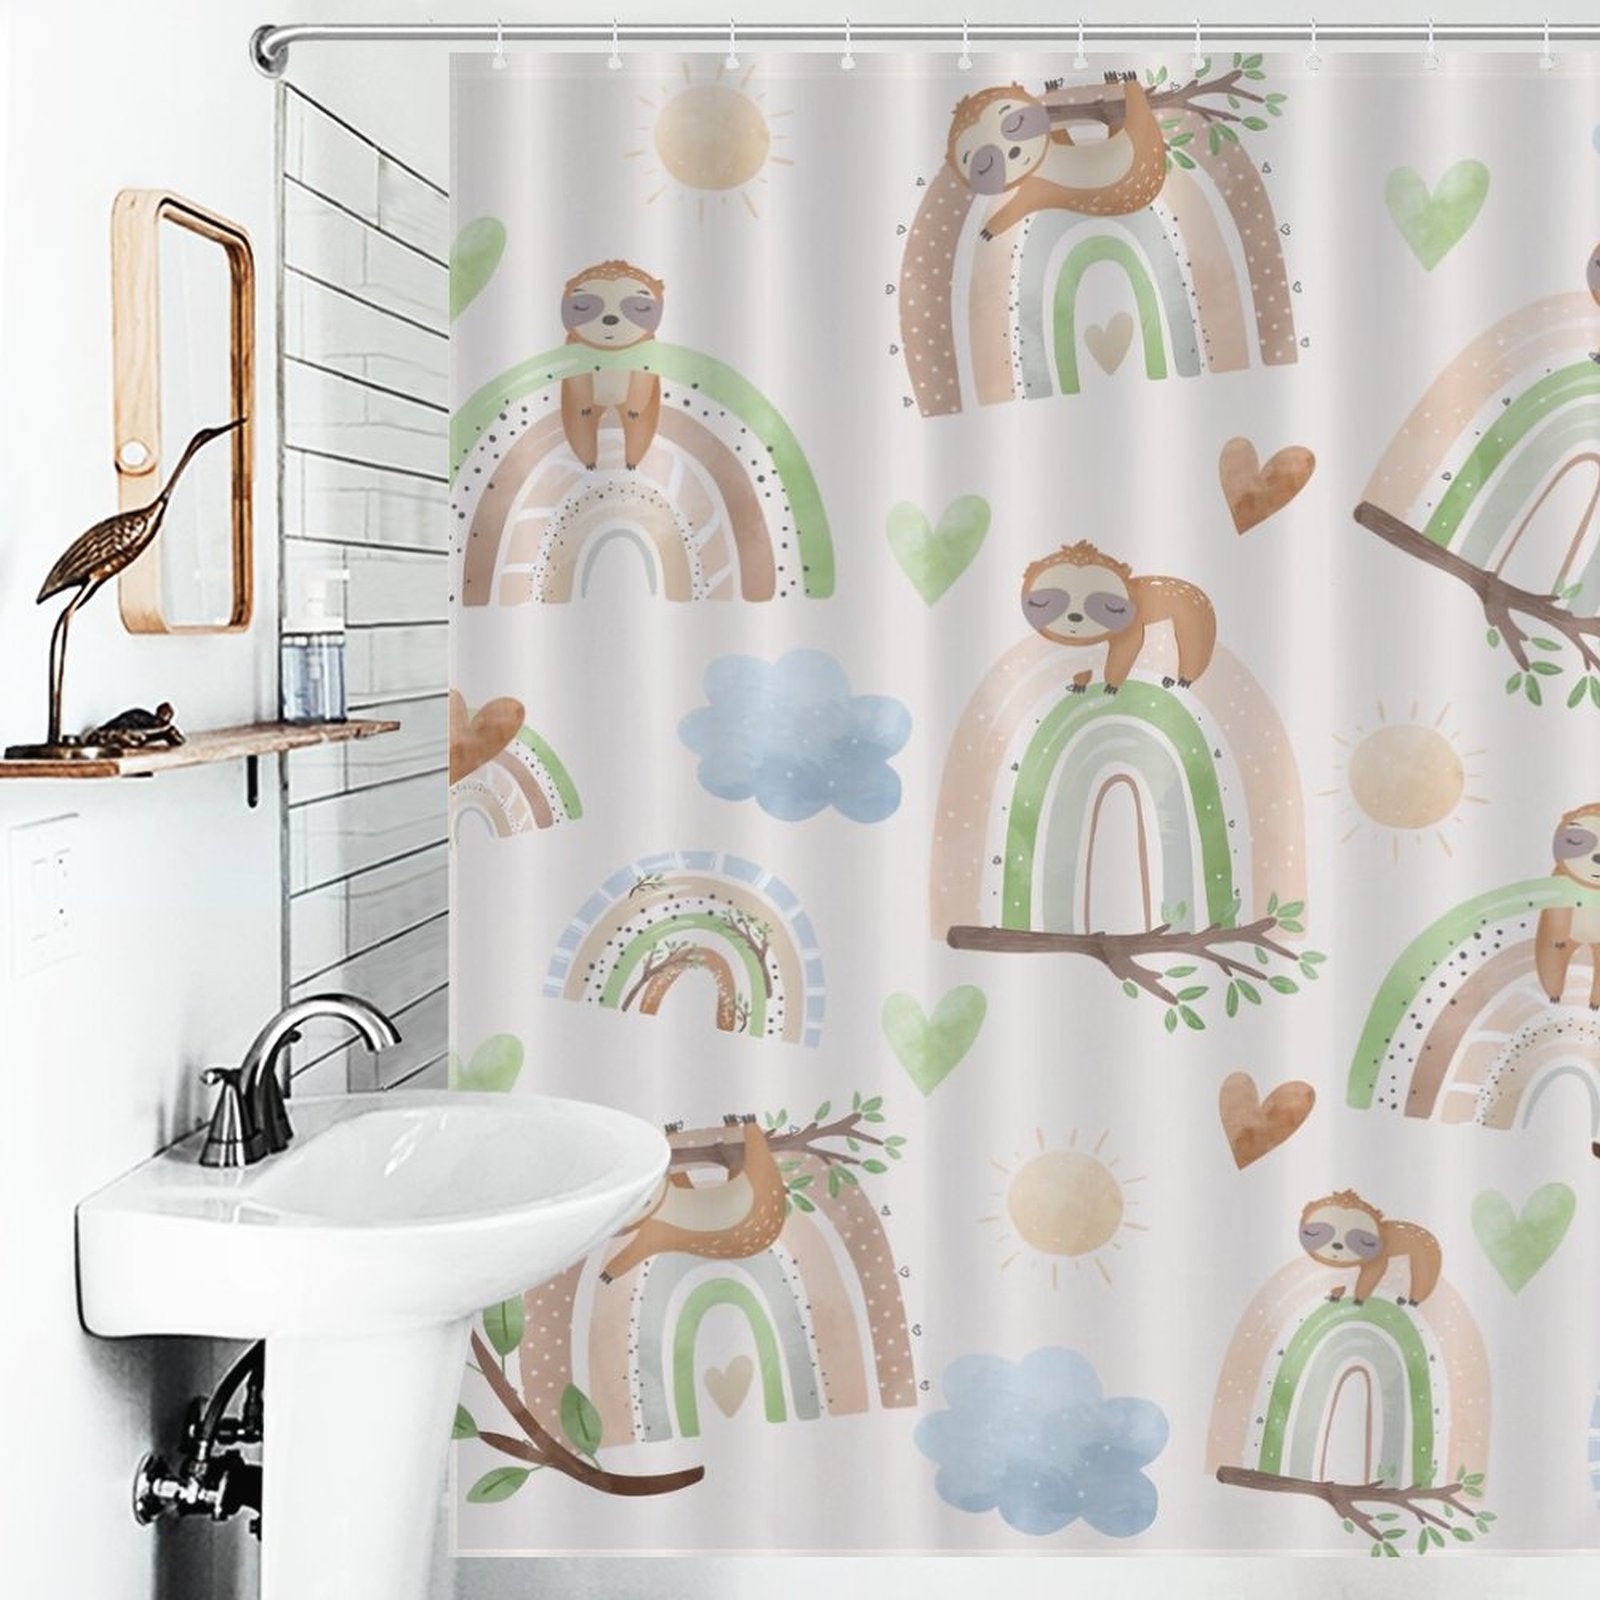 Create a calming oasis in your bathroom with a waterproof Sloth Rainbow Shower Curtain-Cottoncat featuring adorable sloths and vibrant rainbows by Cotton Cat.